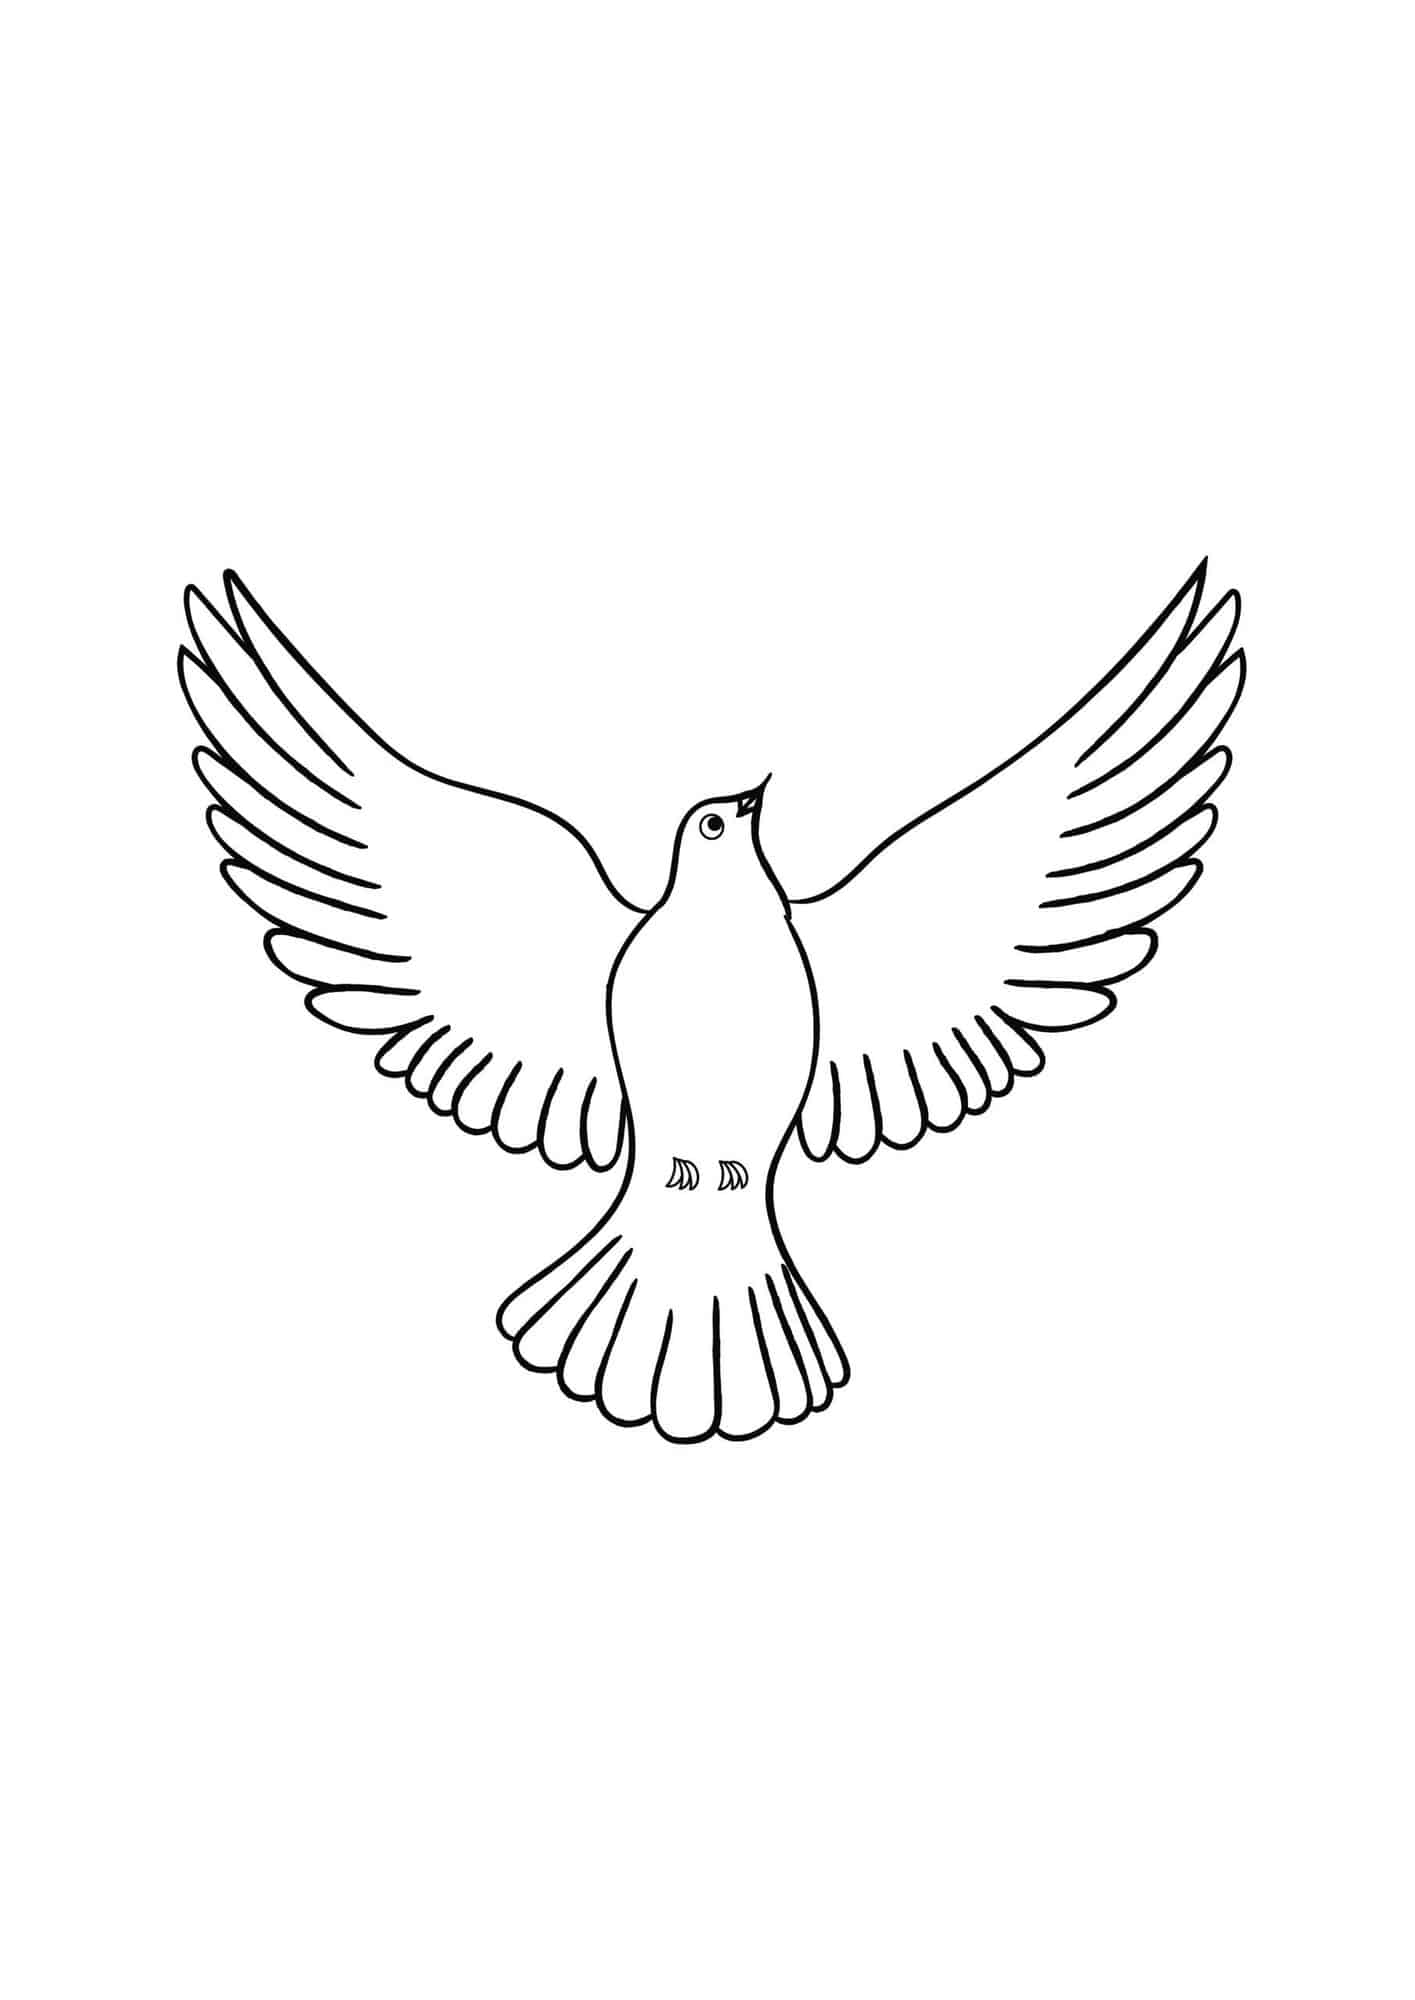 A dove template with an image of a dove with its wings wide open.